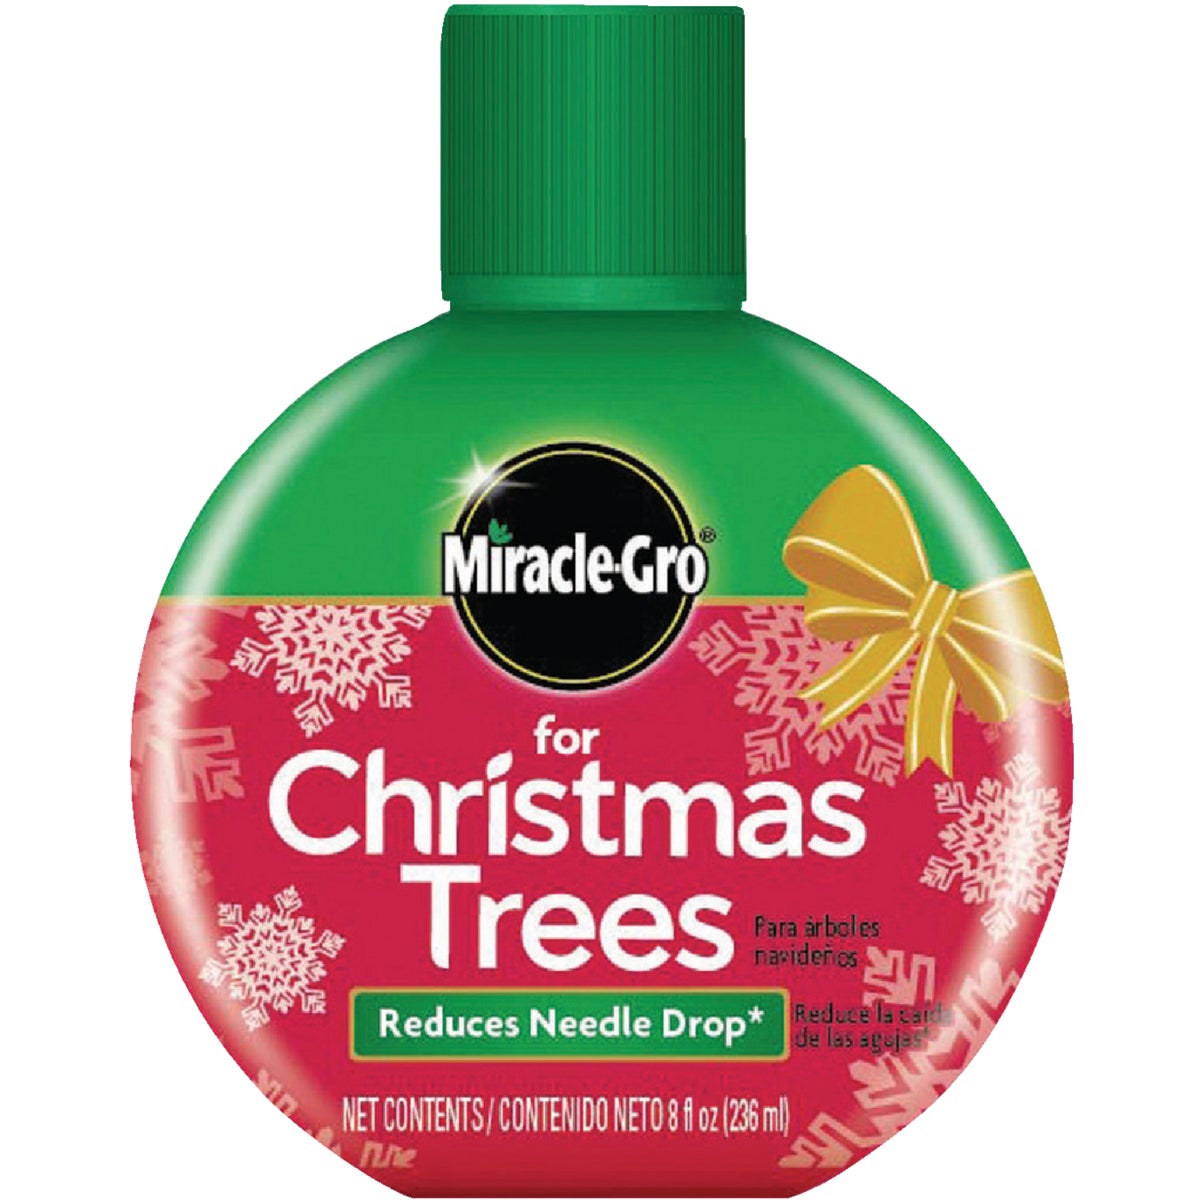 Item 900069, Miracle-Gro for Christmas trees helps keep tree hydrated to reduce needle 